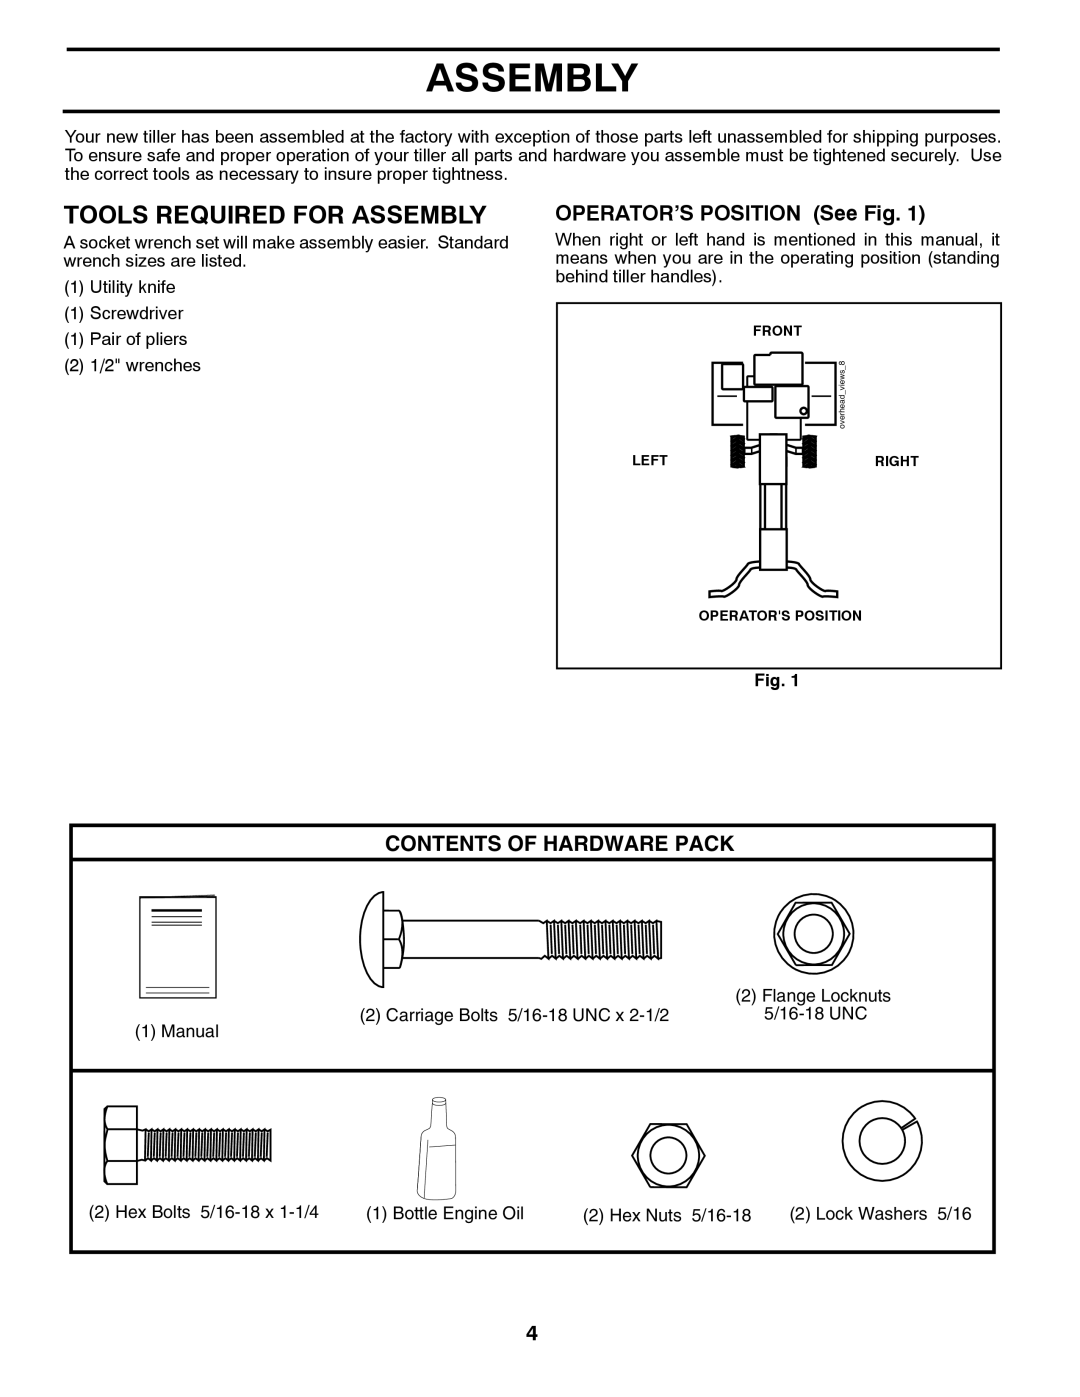 Husqvarna FT900 owner manual Tools Required For Assembly, OPERATOR’S POSITION See Fig, Contents Of Hardware Pack 